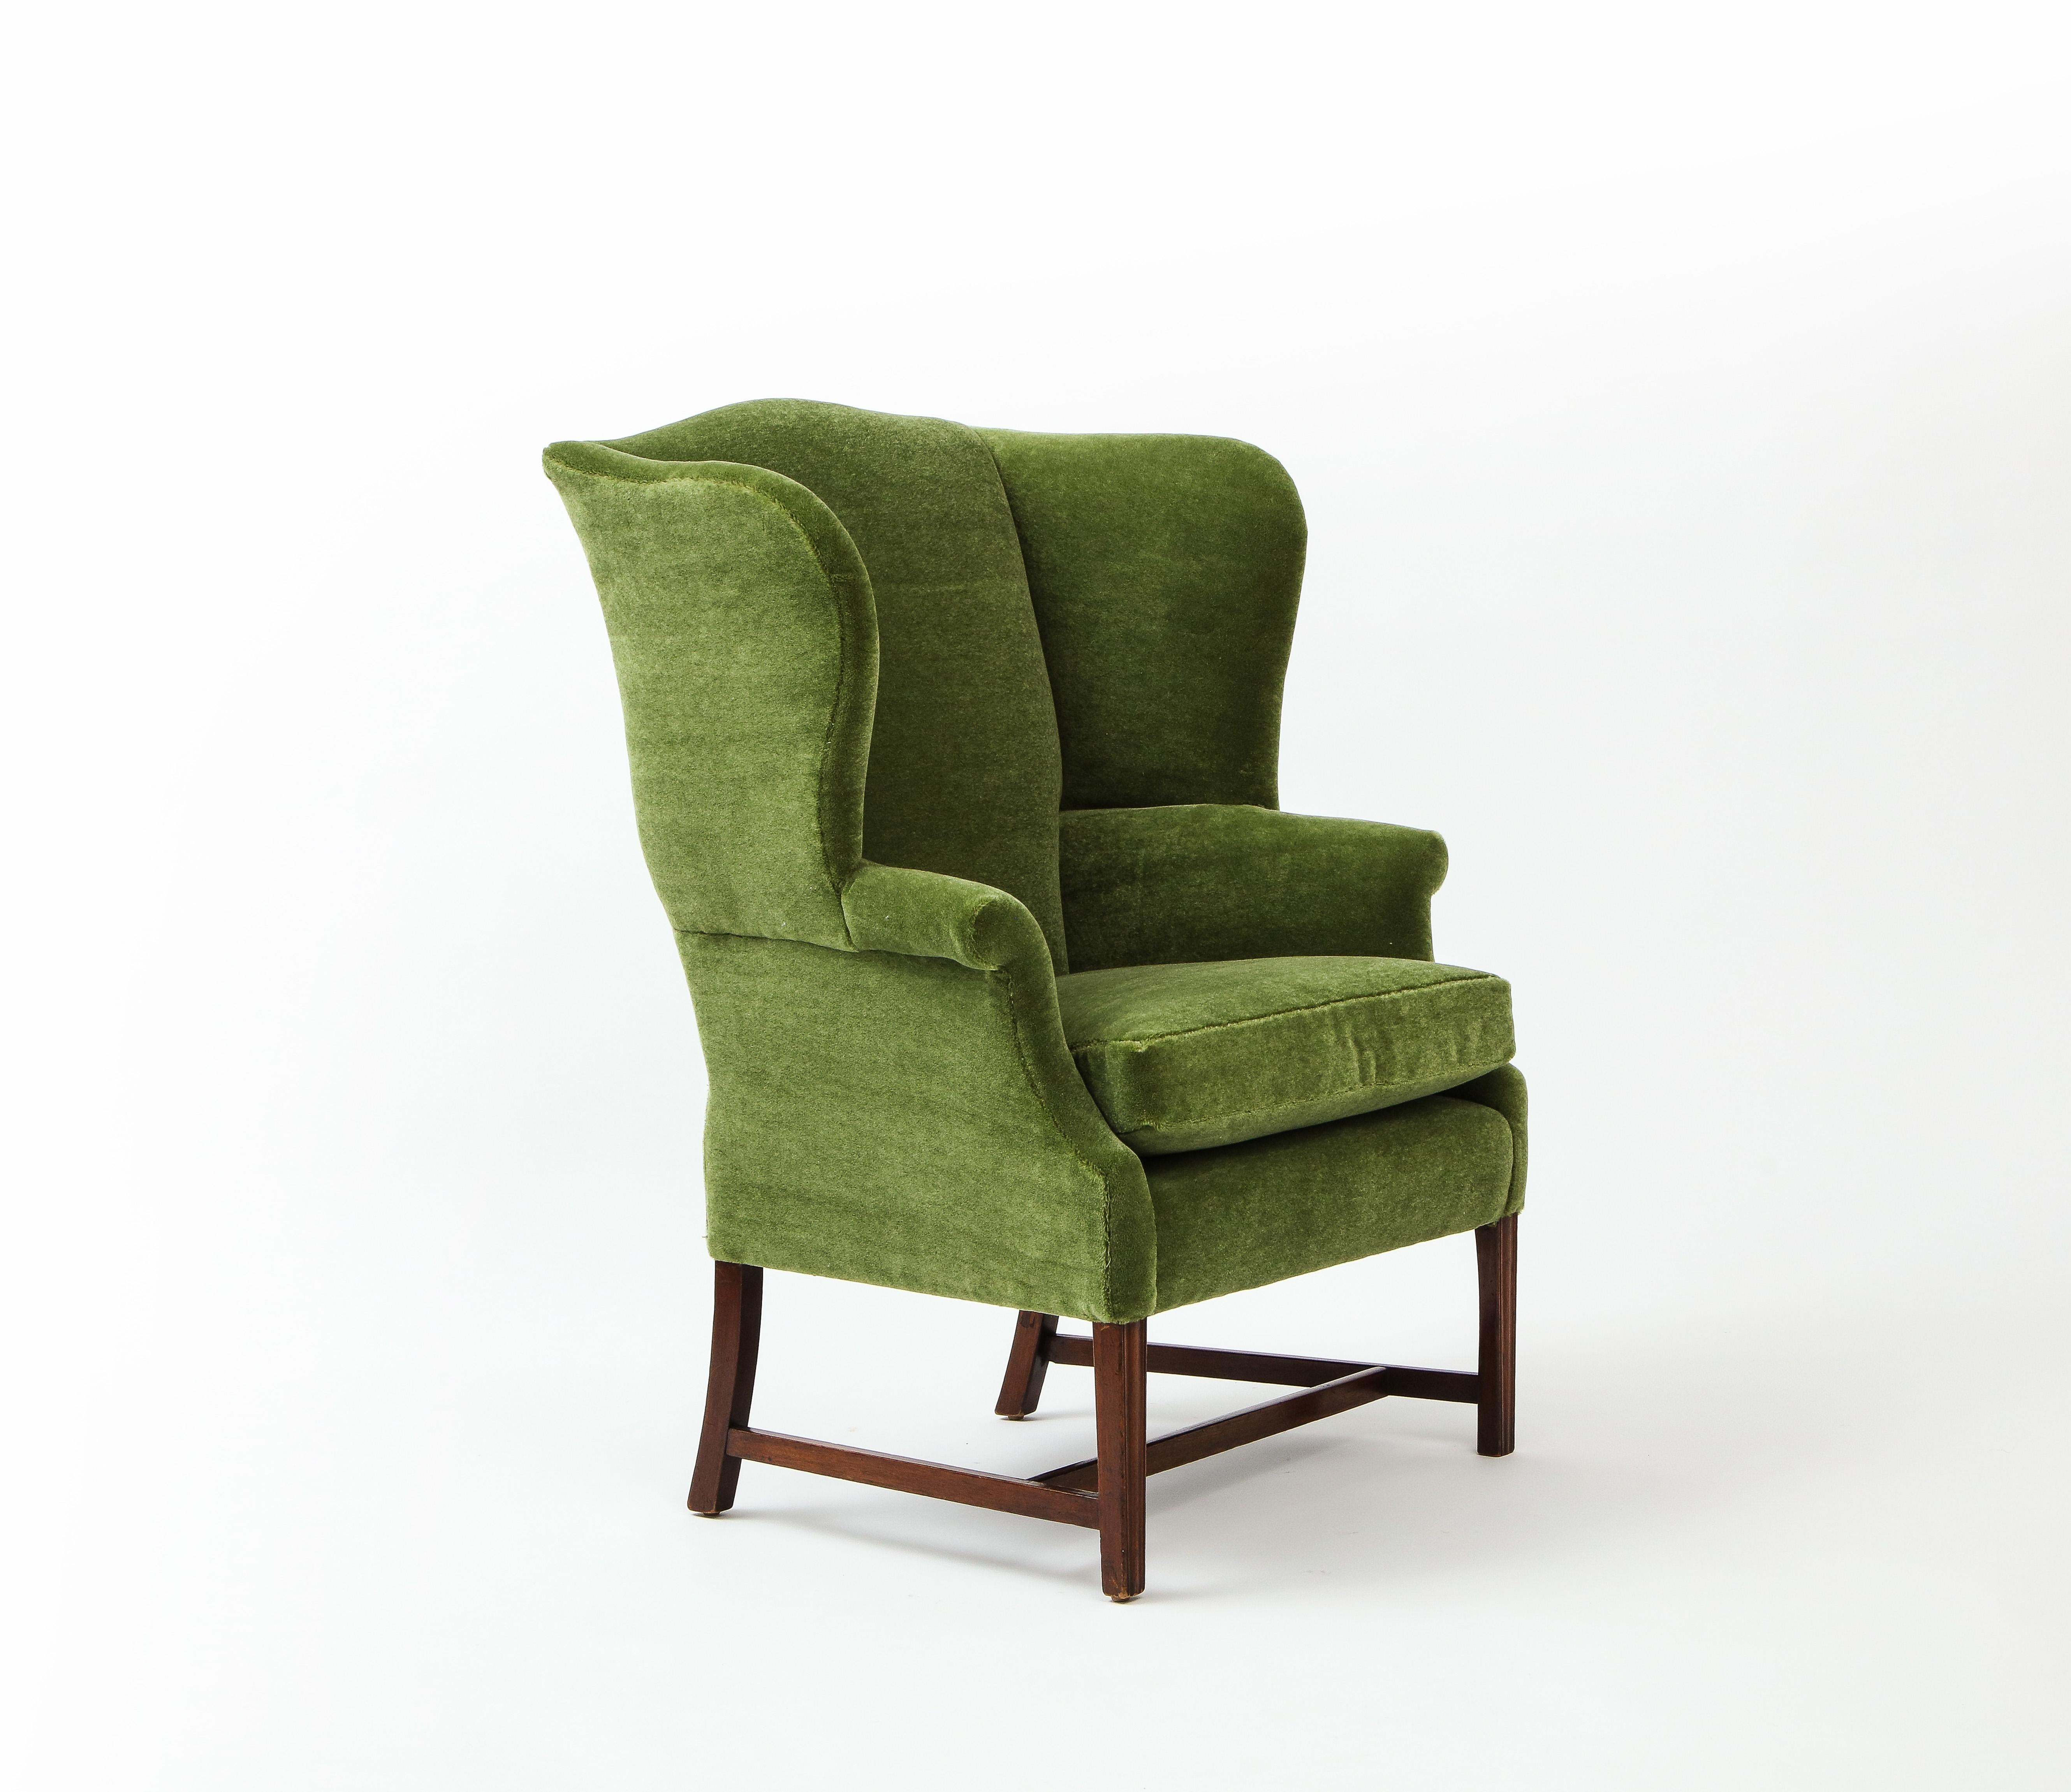 Wingback Library Chair in Green Pierre Frey Mohair, England late 19th Century 5